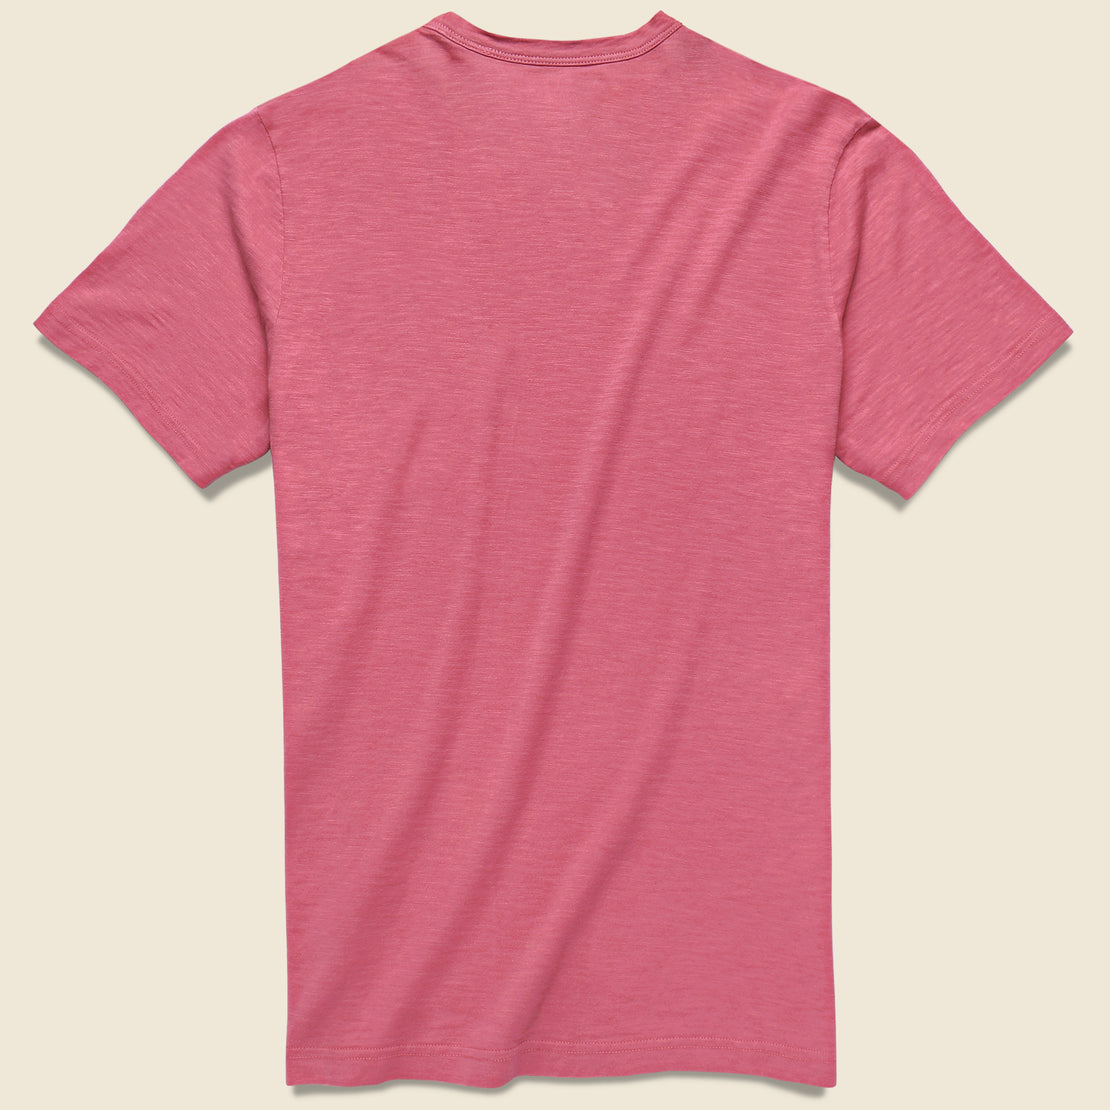 Garment Dyed Pocket Tee - Hibiscus - Faherty - STAG Provisions - Tops - S/S Tee